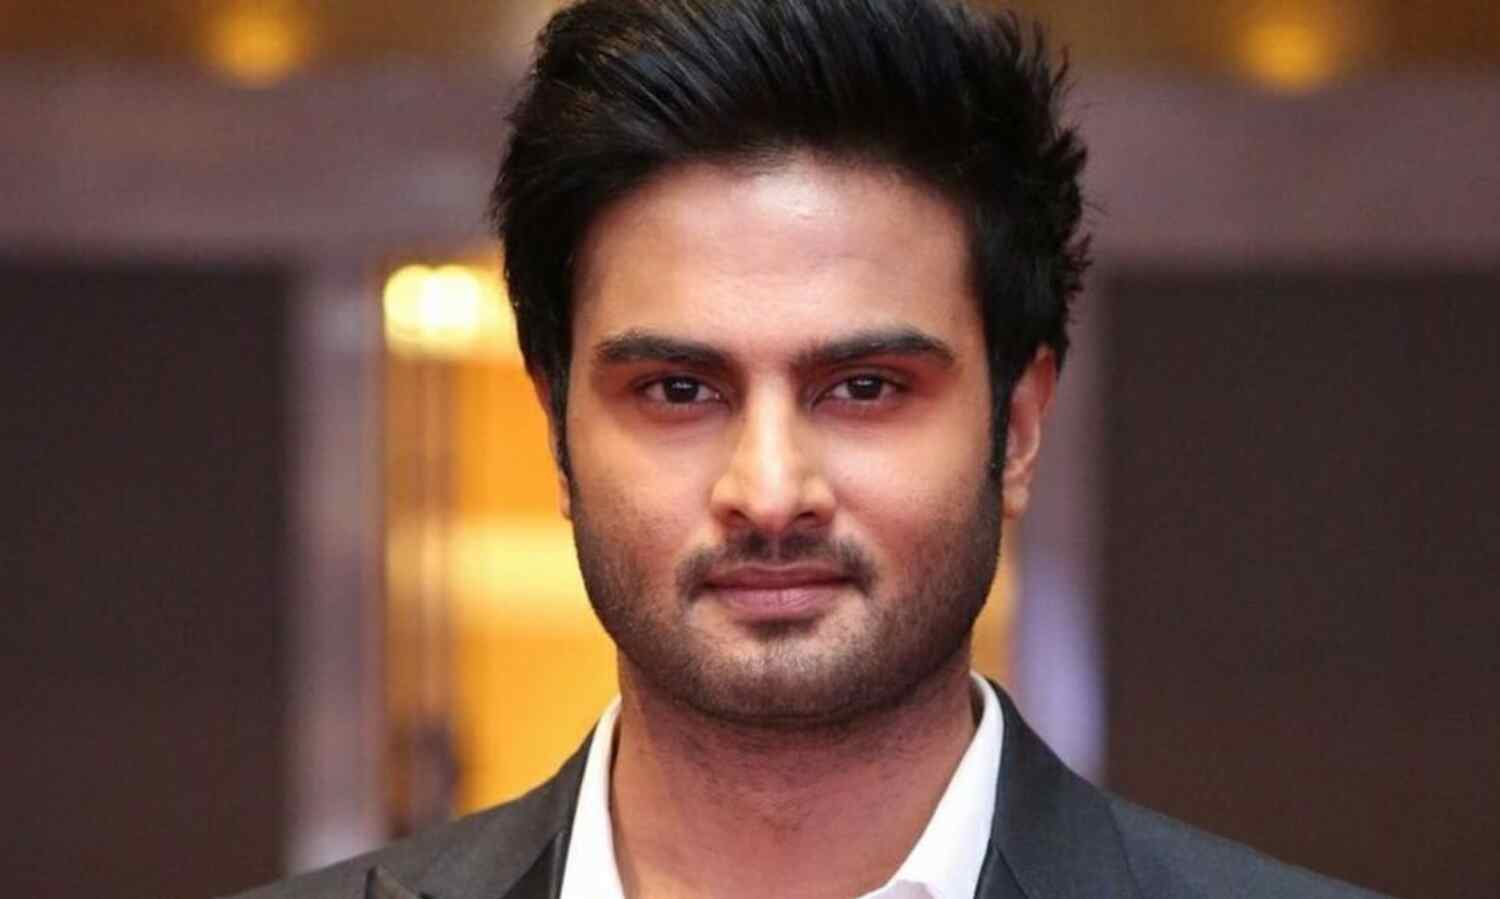 When Sudheer Babu rejected a role in Brahmastra